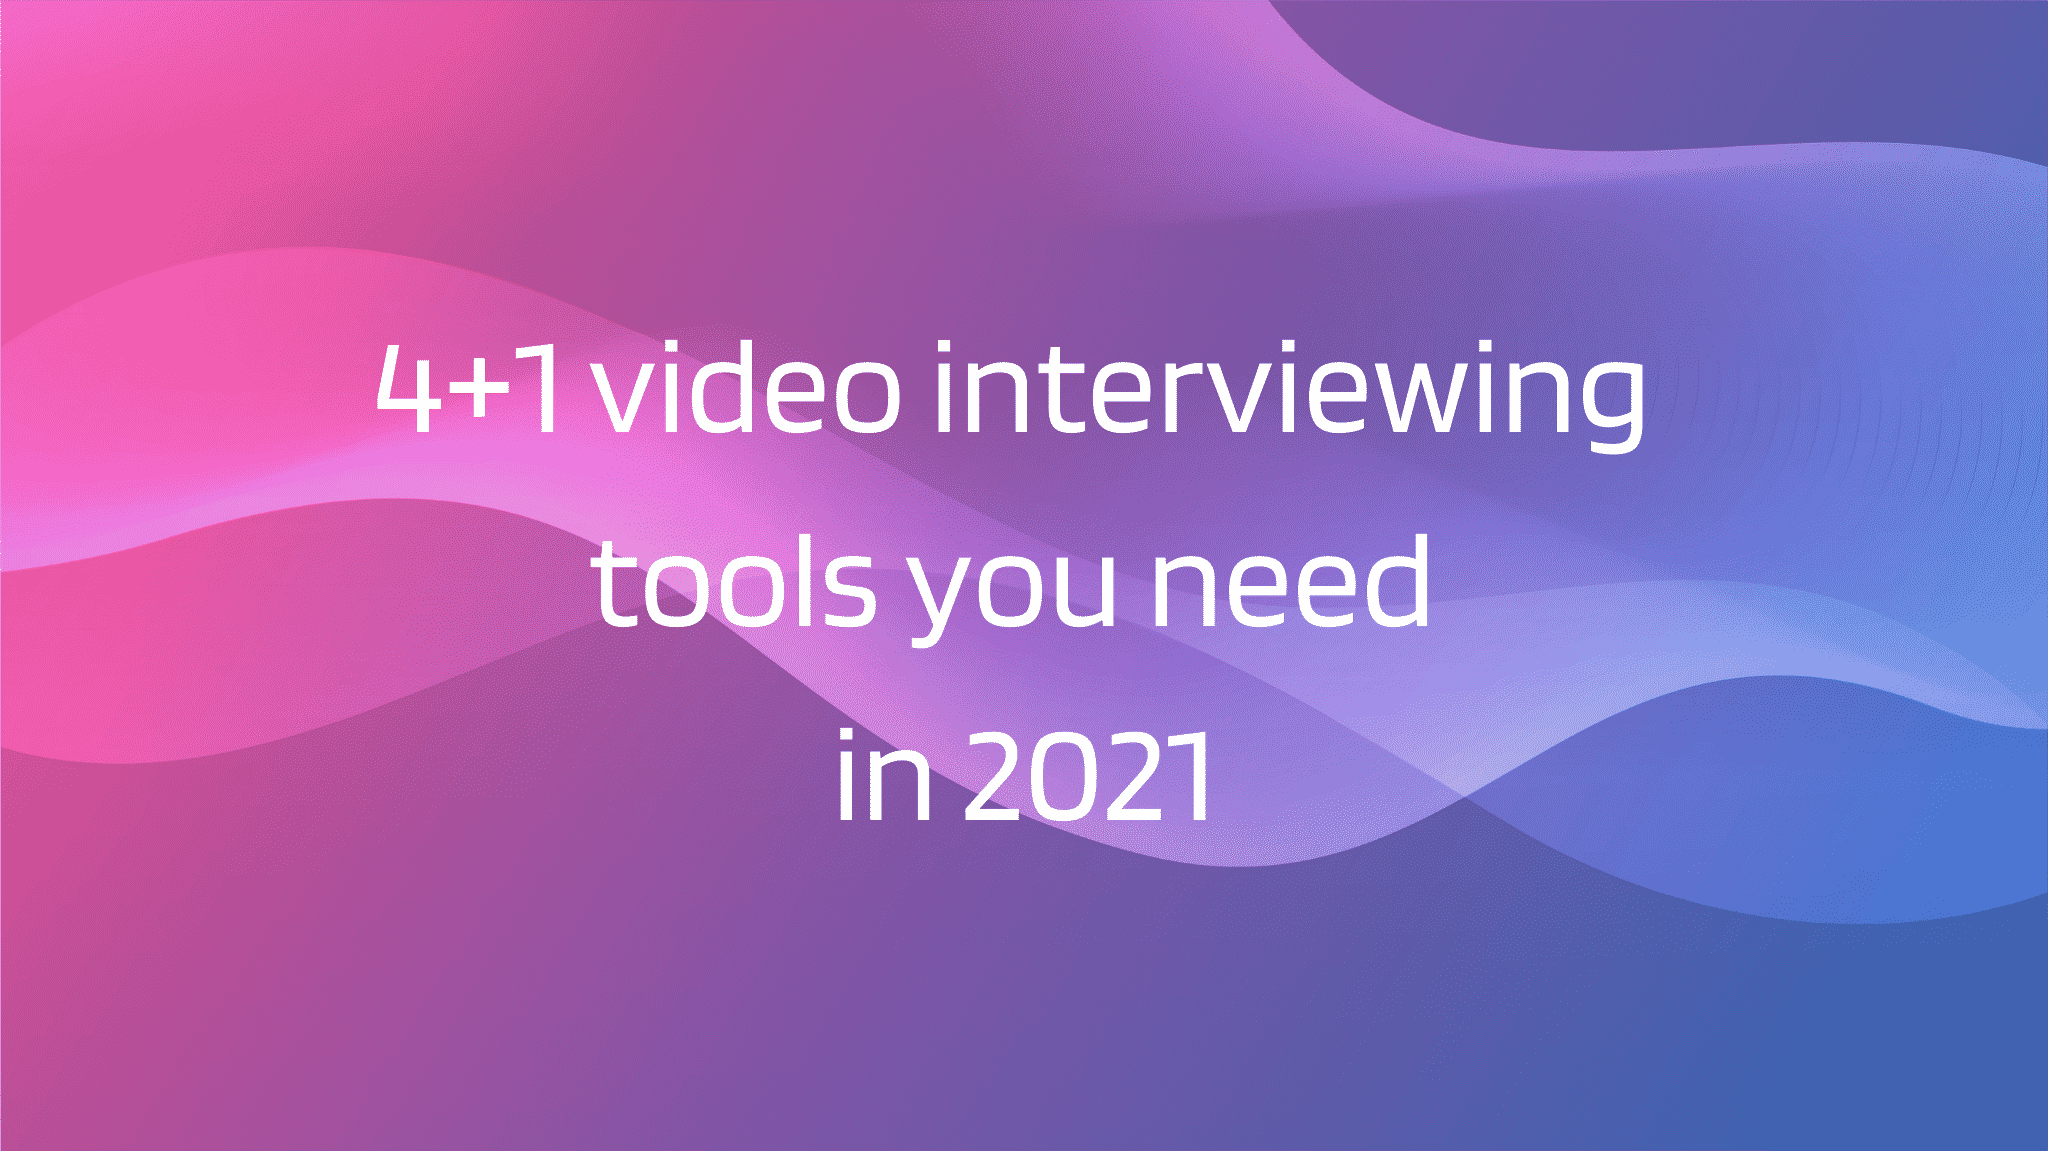 4+1 video interviewing tools you need in 2021